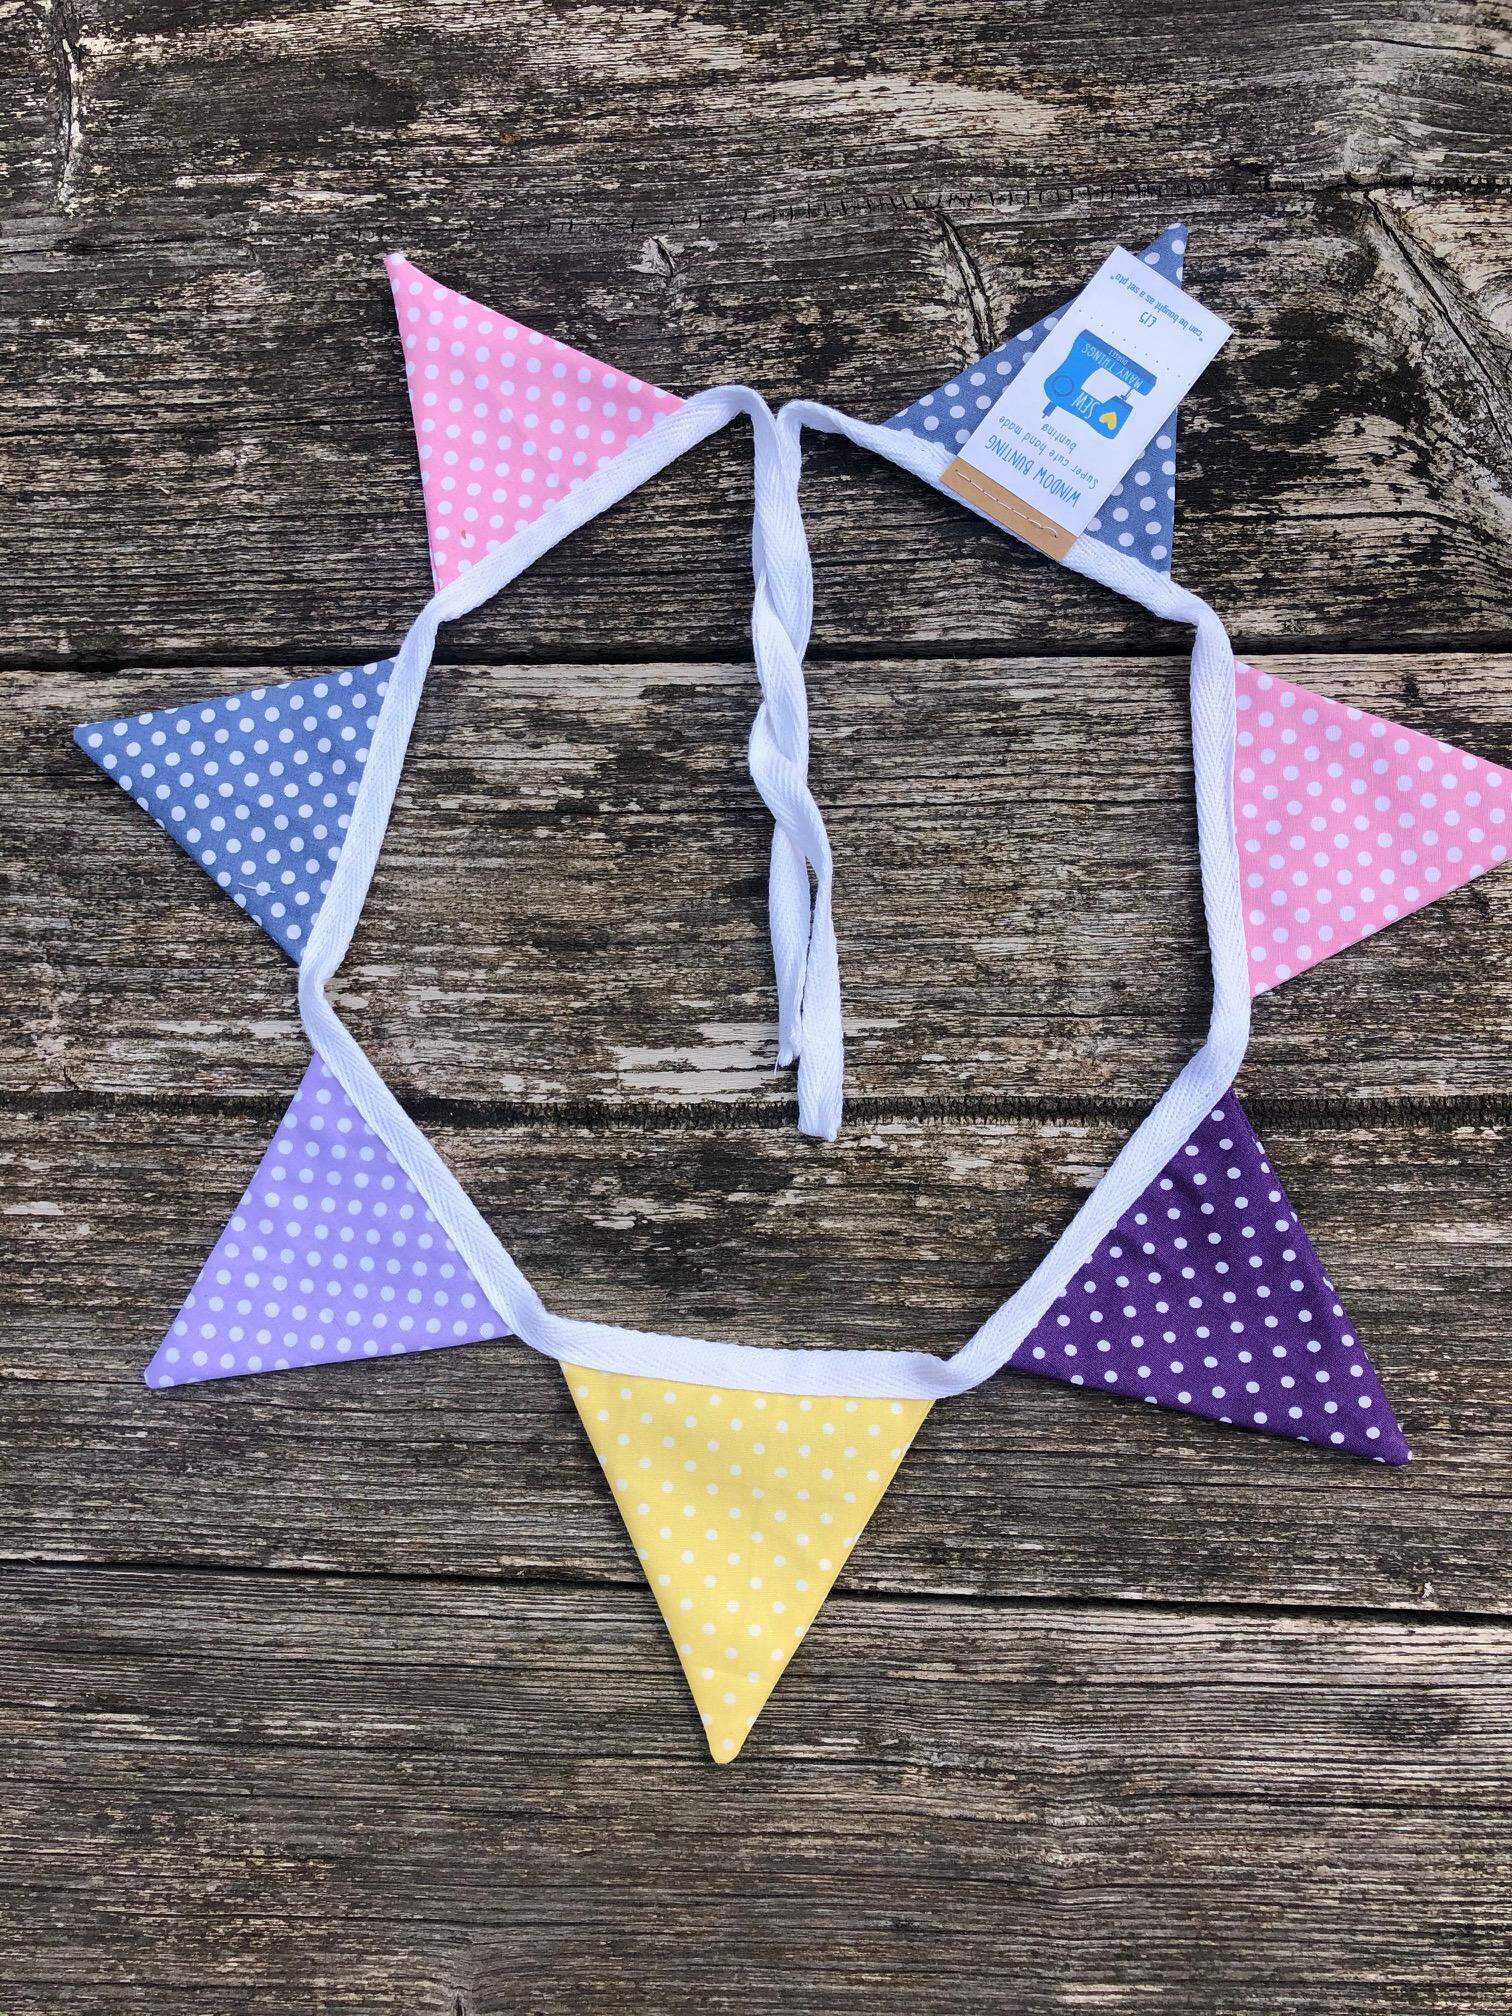 Bunting perfect for hanging in windows. Various colours